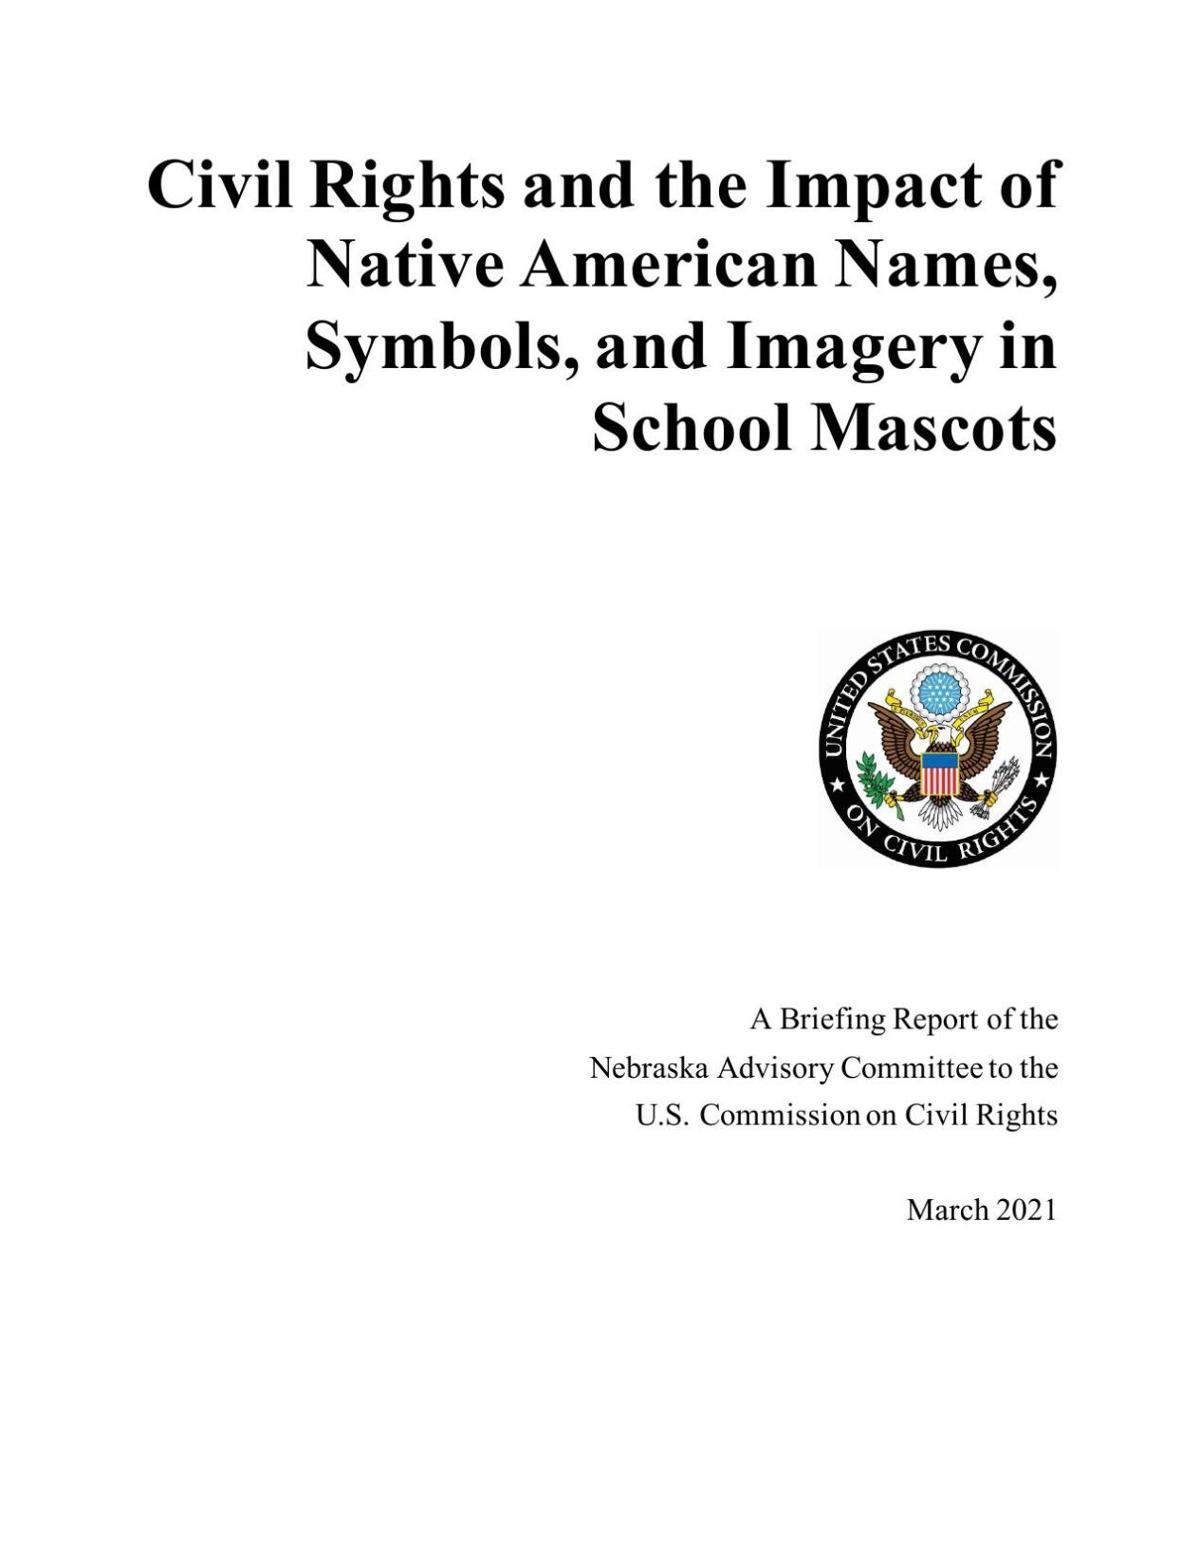 PDF) Symbols of Pride or Prejudice? Examining the Impact of Native American  Sports Mascots on Stereotype Application